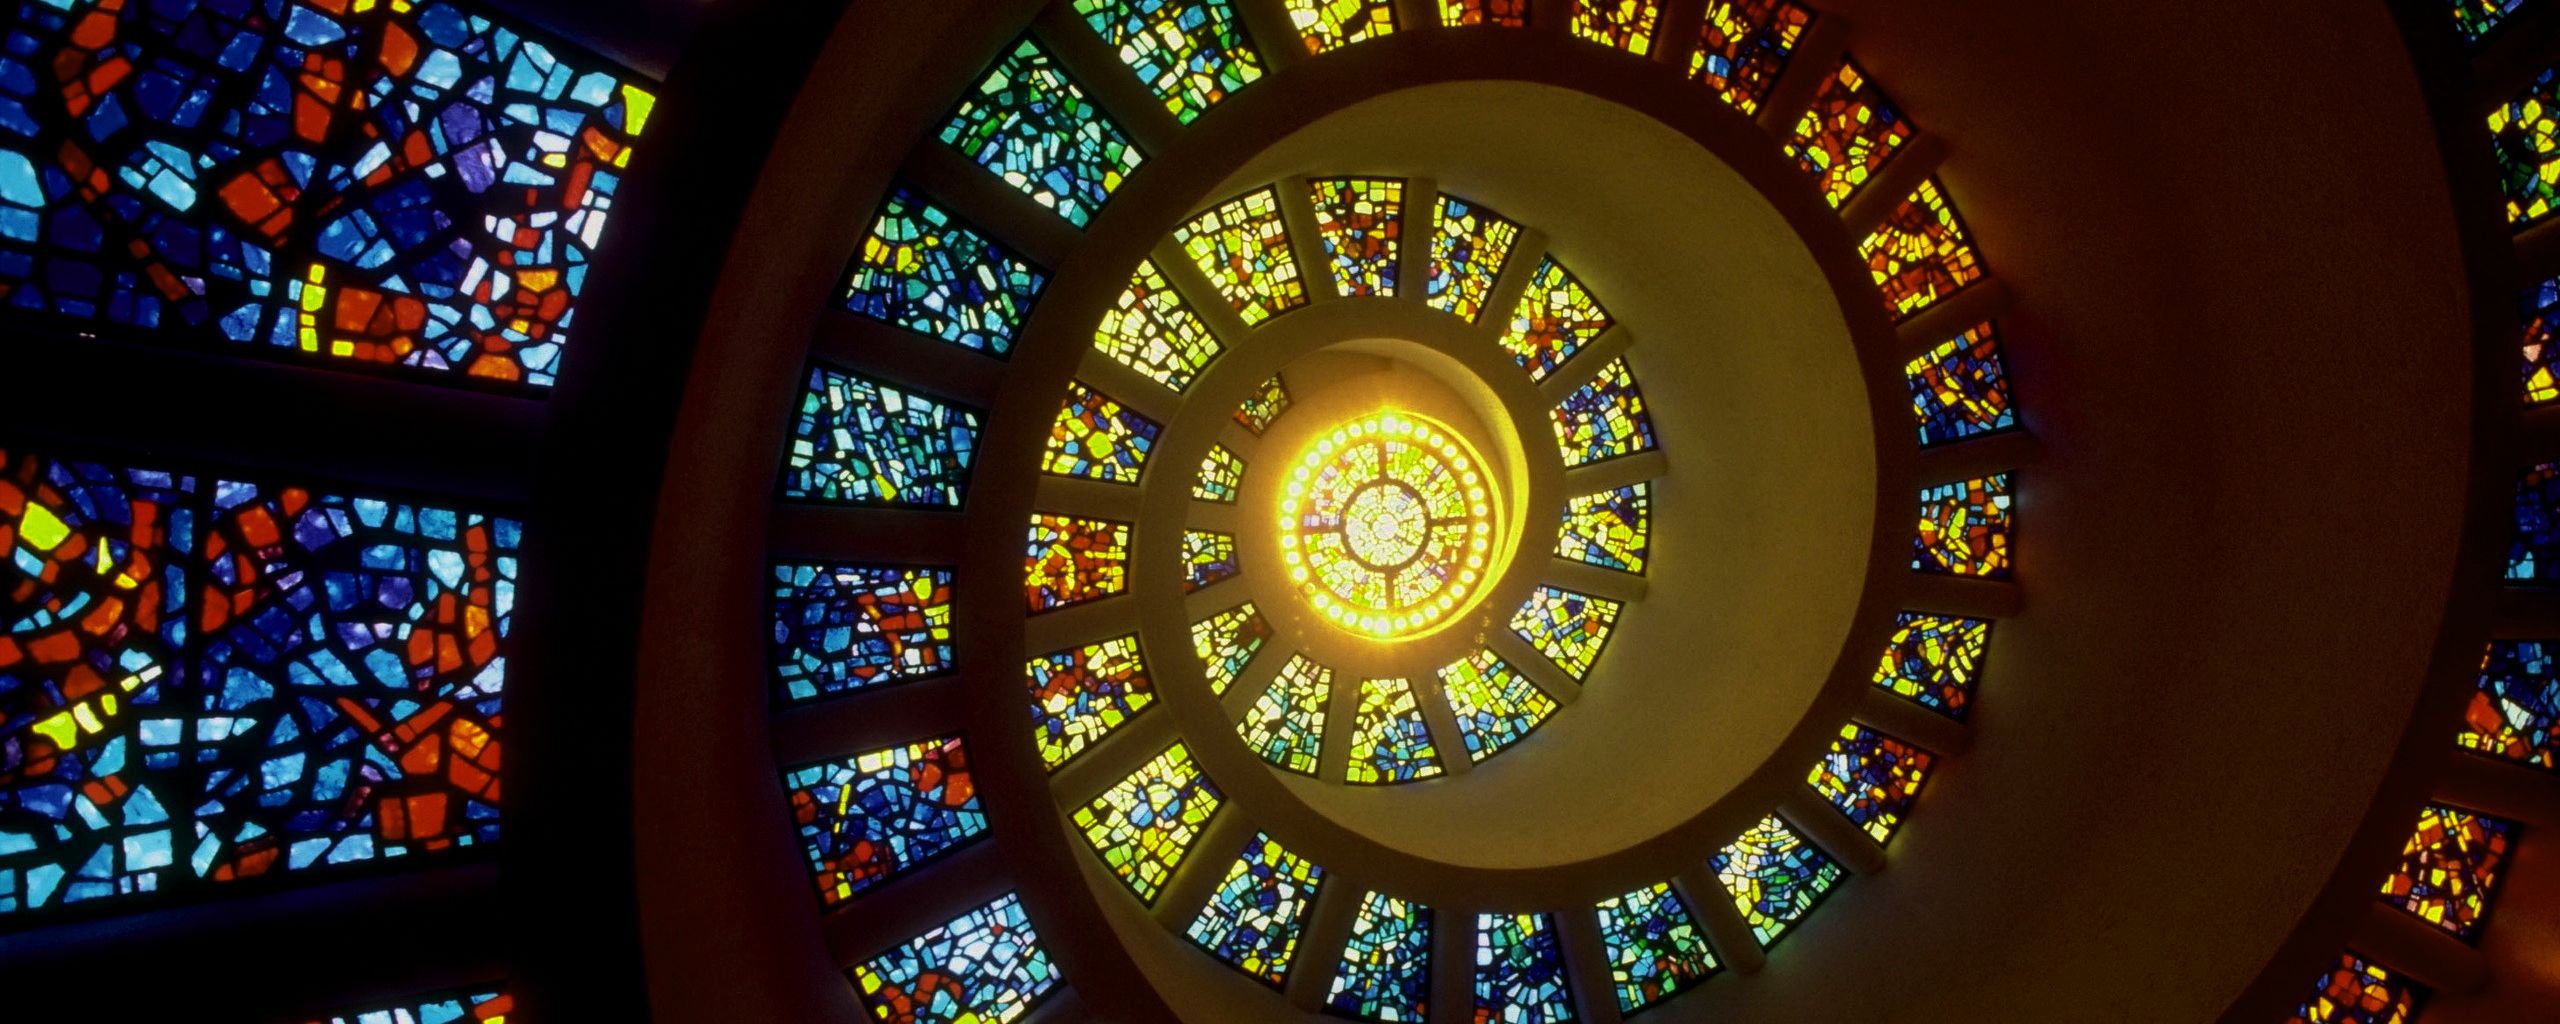 Stained Glass Window Wallpaper – 2560×1024 High Definition ...